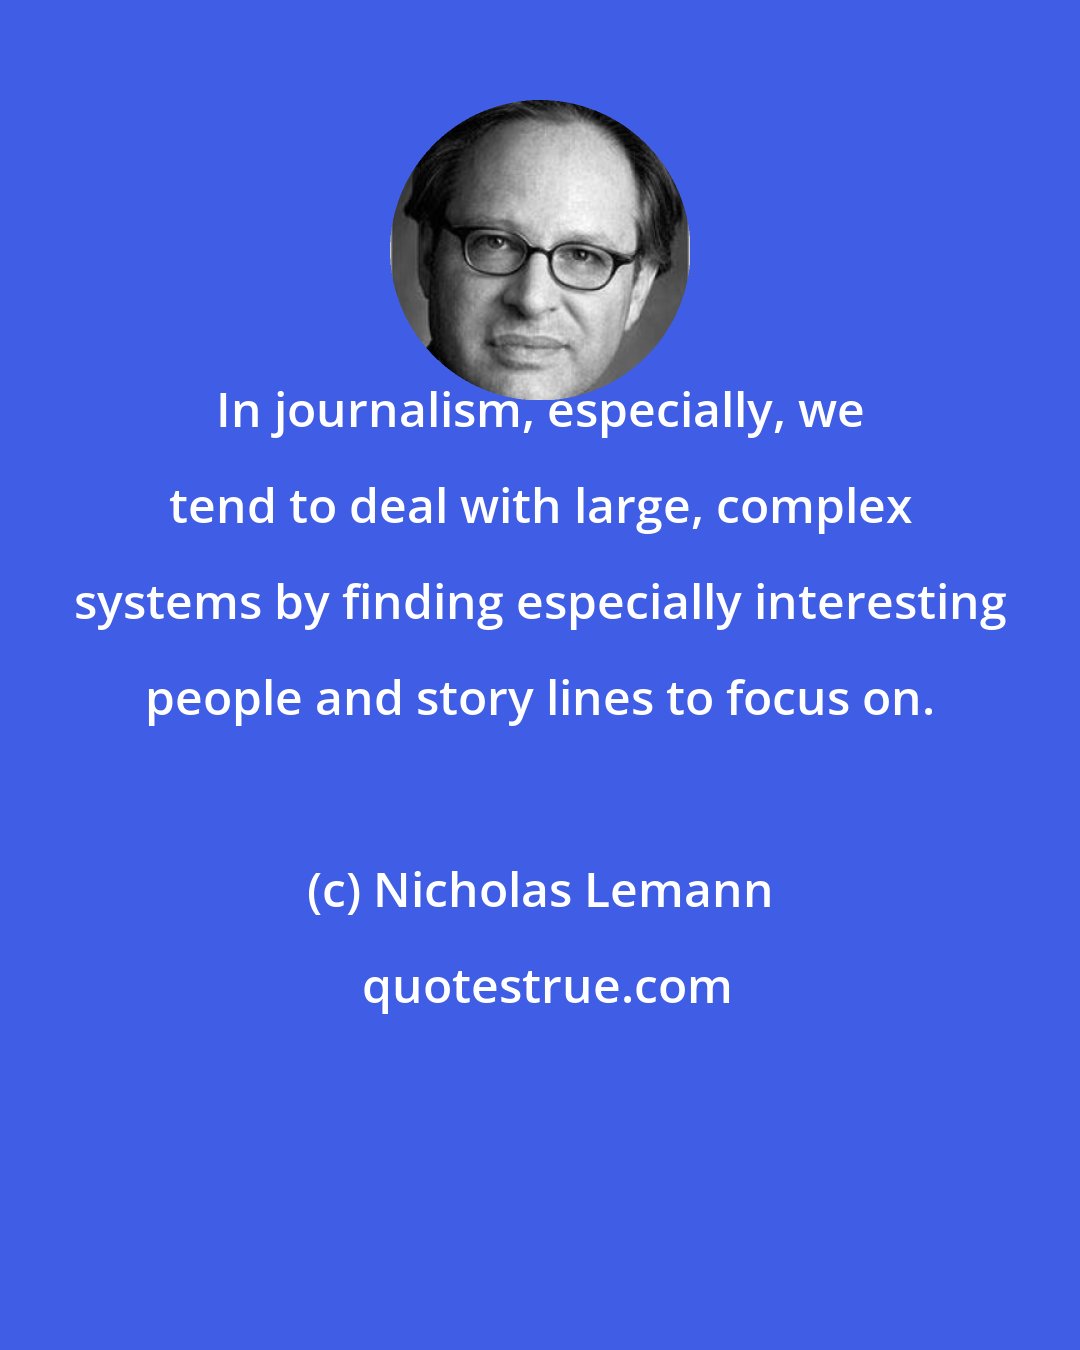 Nicholas Lemann: In journalism, especially, we tend to deal with large, complex systems by finding especially interesting people and story lines to focus on.